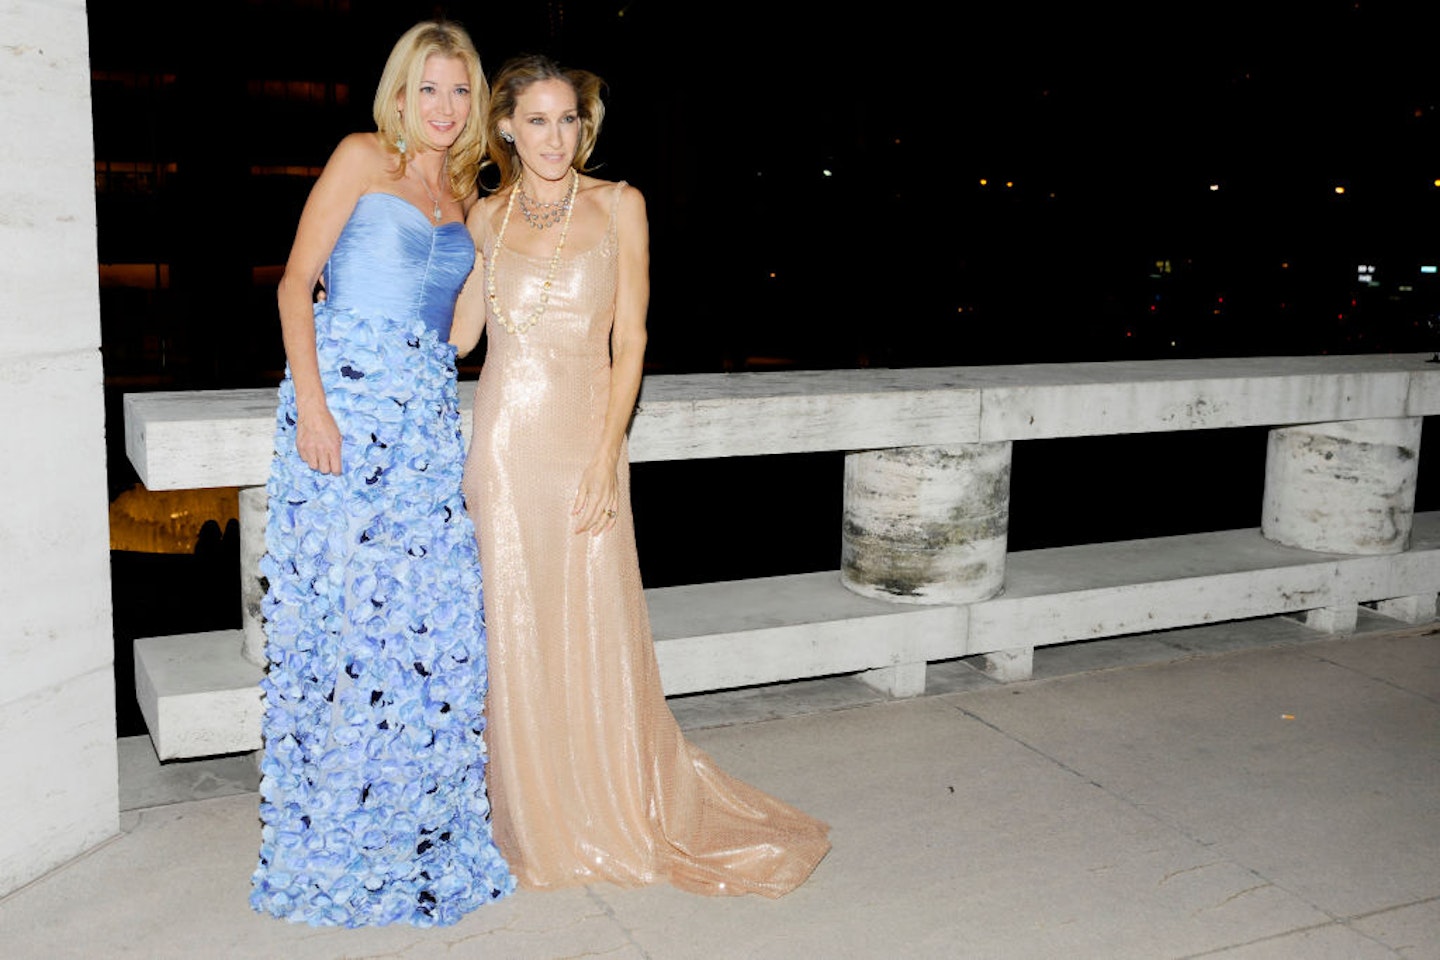 Candace Bushnell and Sarah Jessica Parker